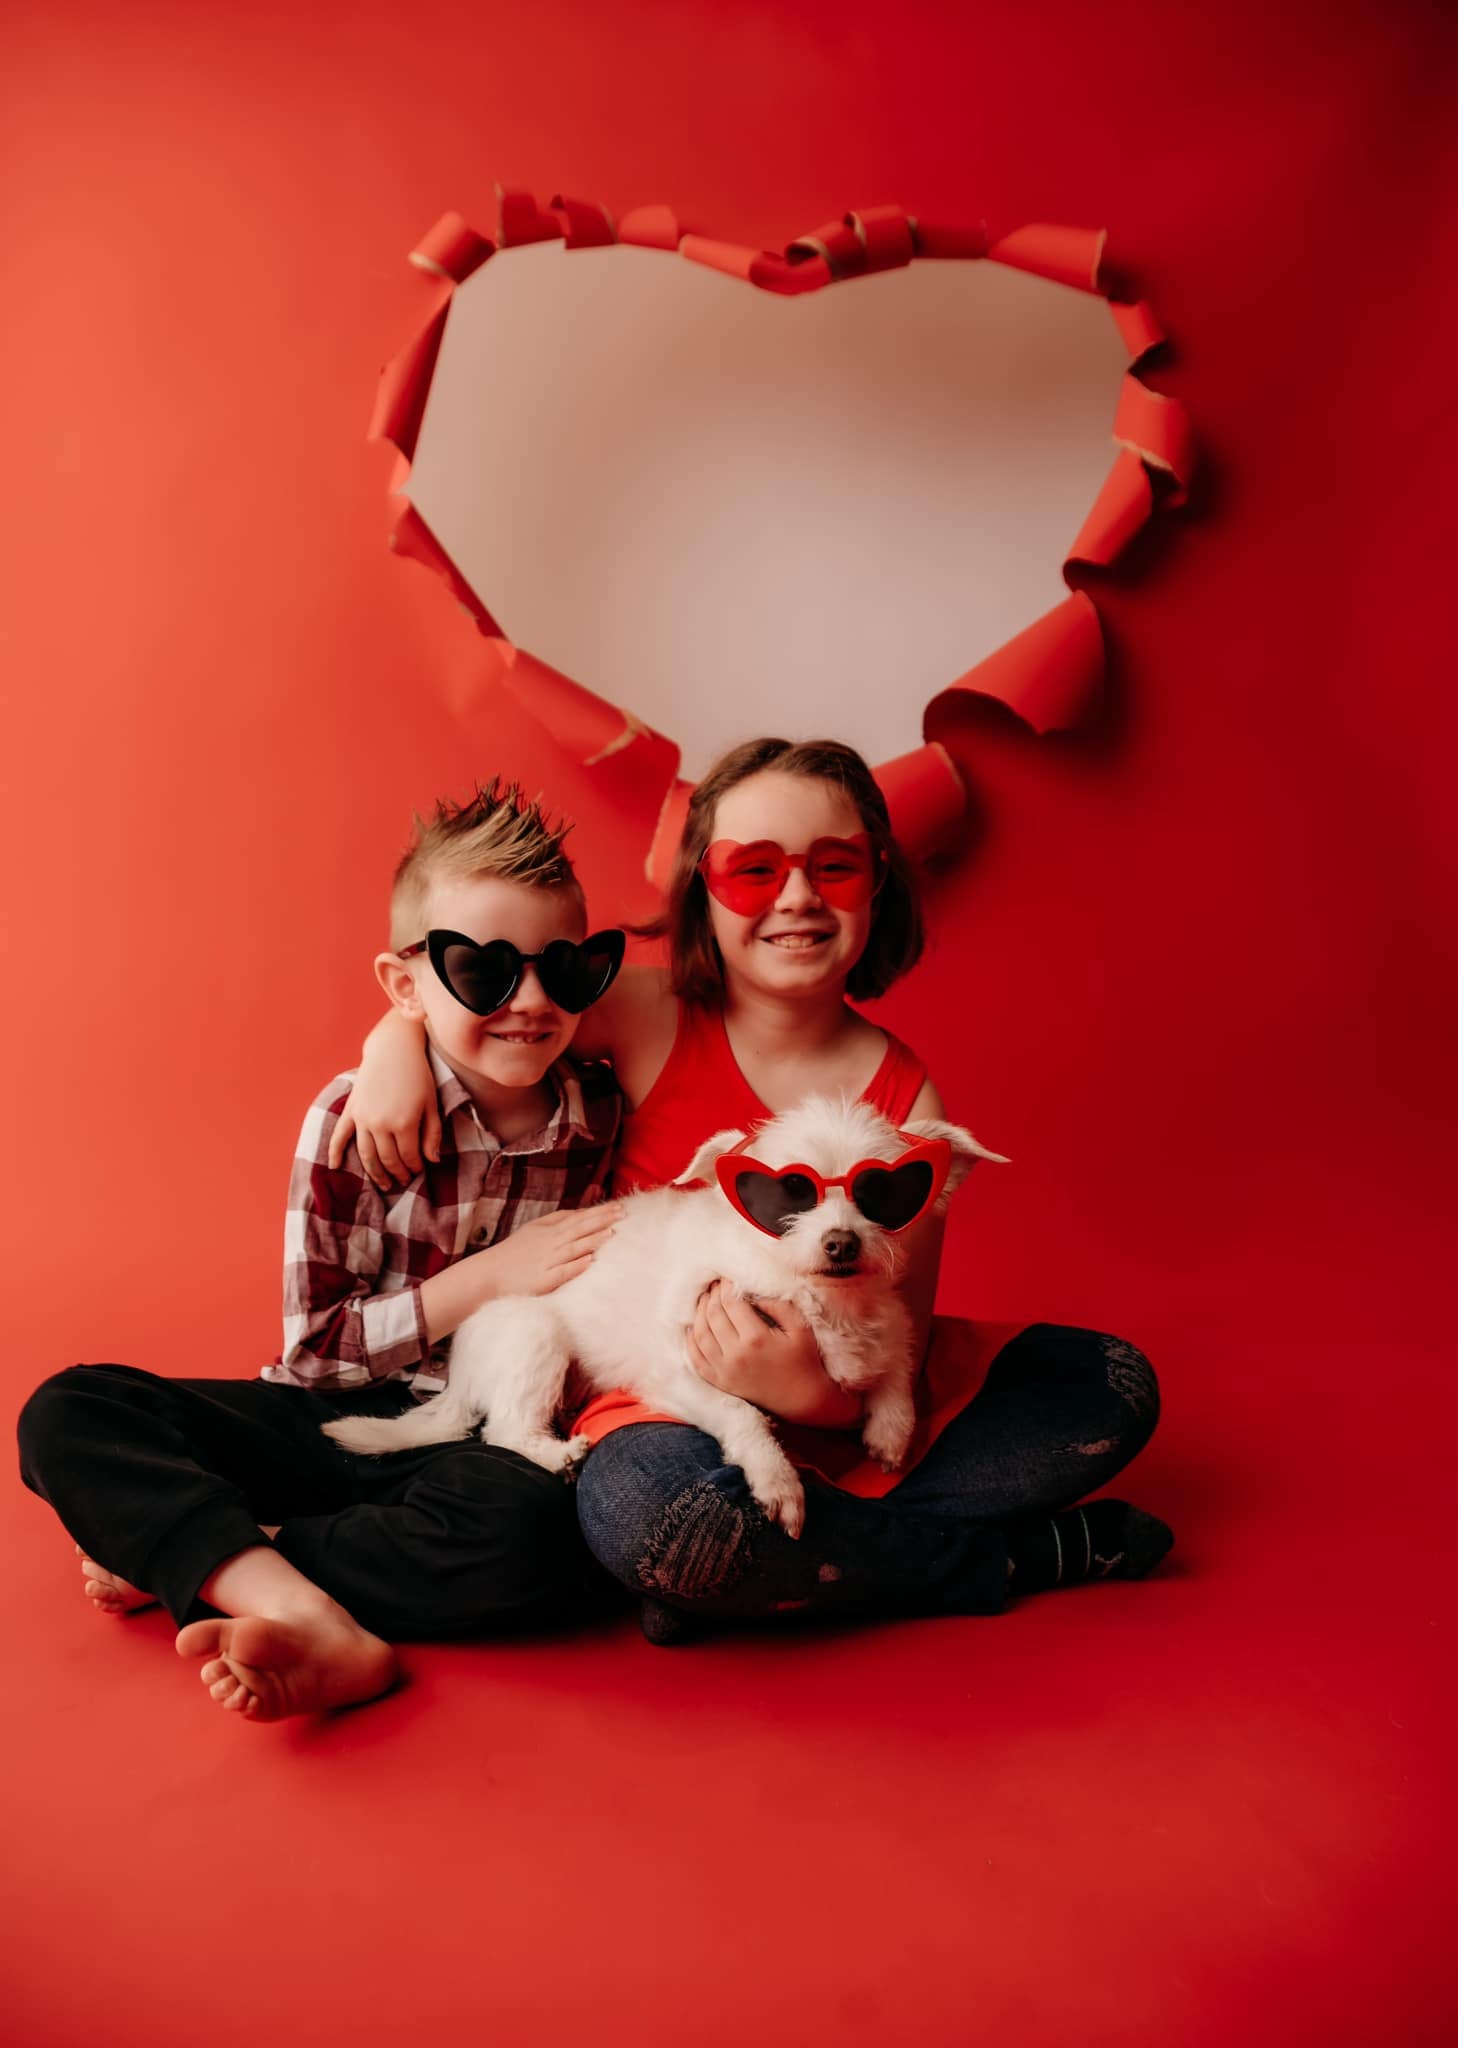 Kate Pet Valentines Red Torn Heart Backdrop Designed by Melissa King